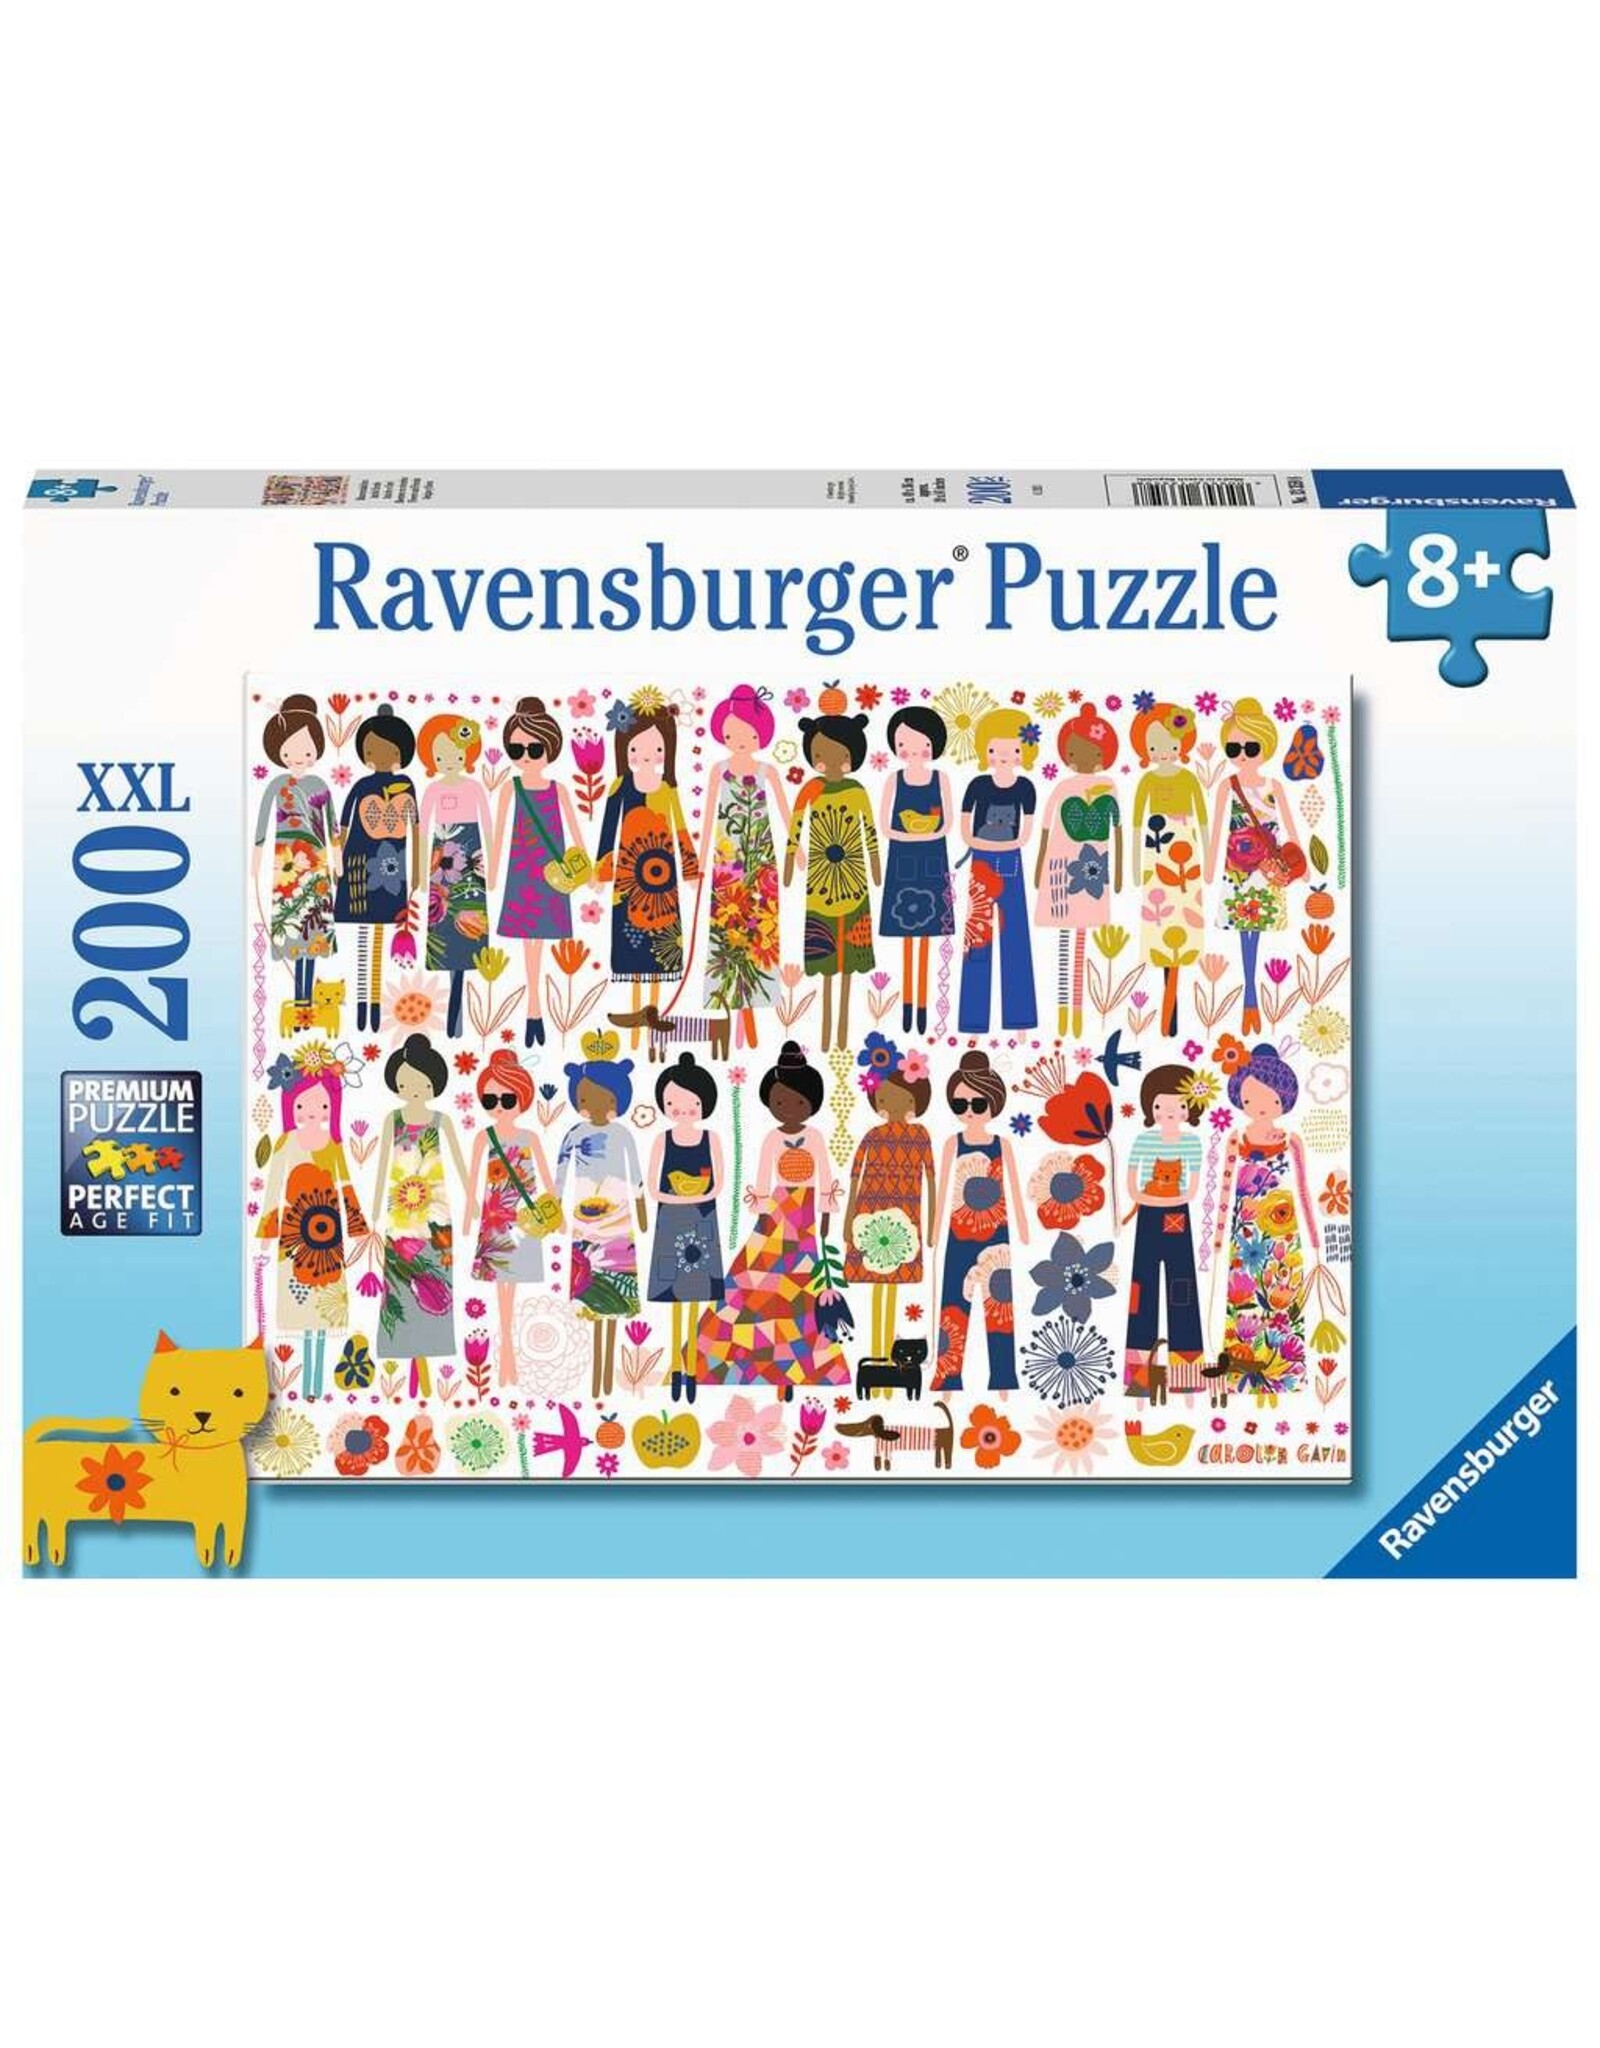 Ravensburger Flowers and Friends 200pc